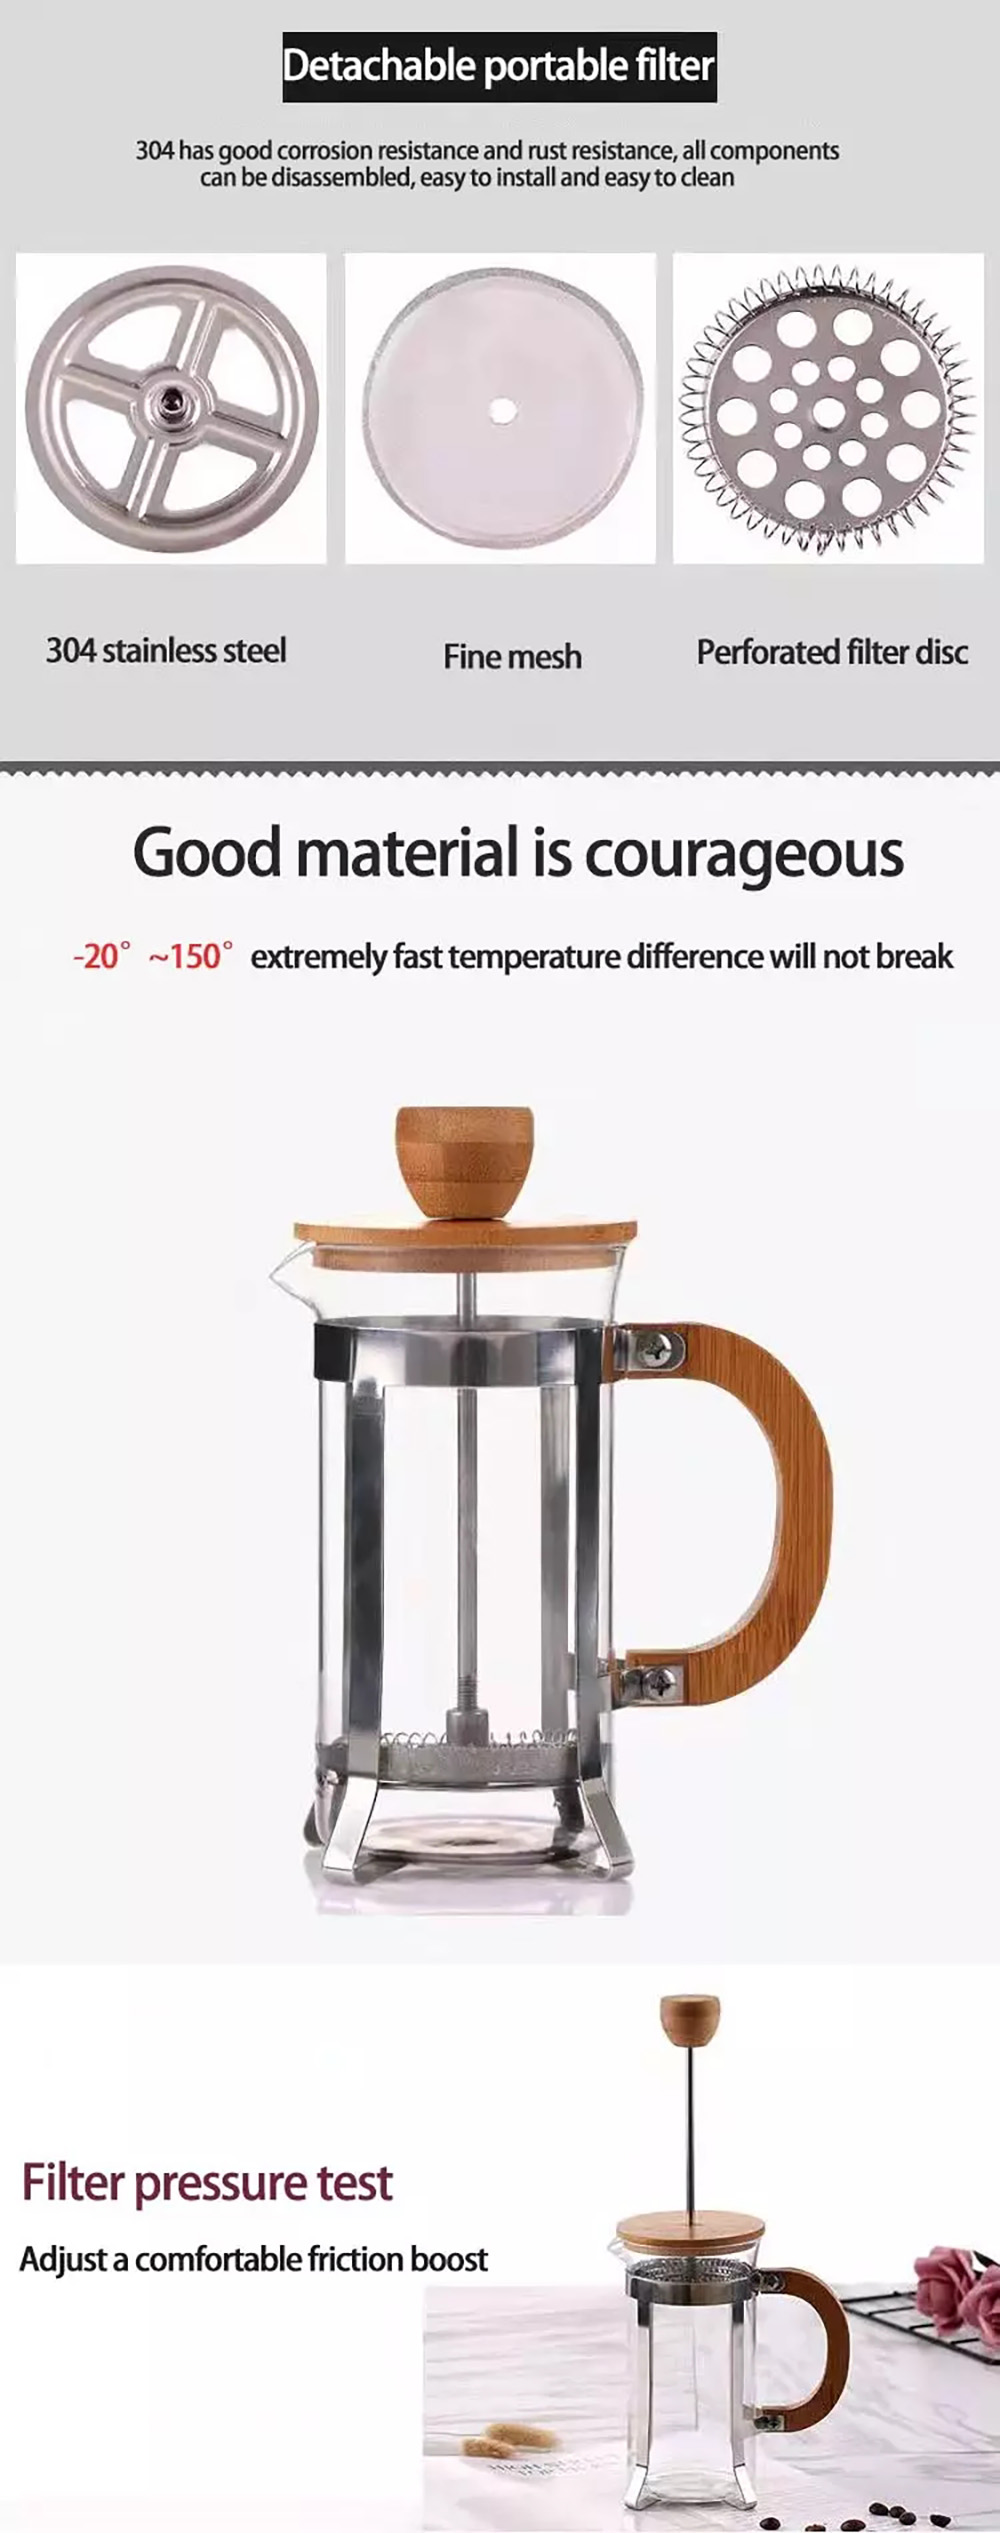 French Coffee Heat-Resistant Filter Presses Coffee Maker Pot Glass Pots Hollow Coffee Tea Teapots with Wooden Handle